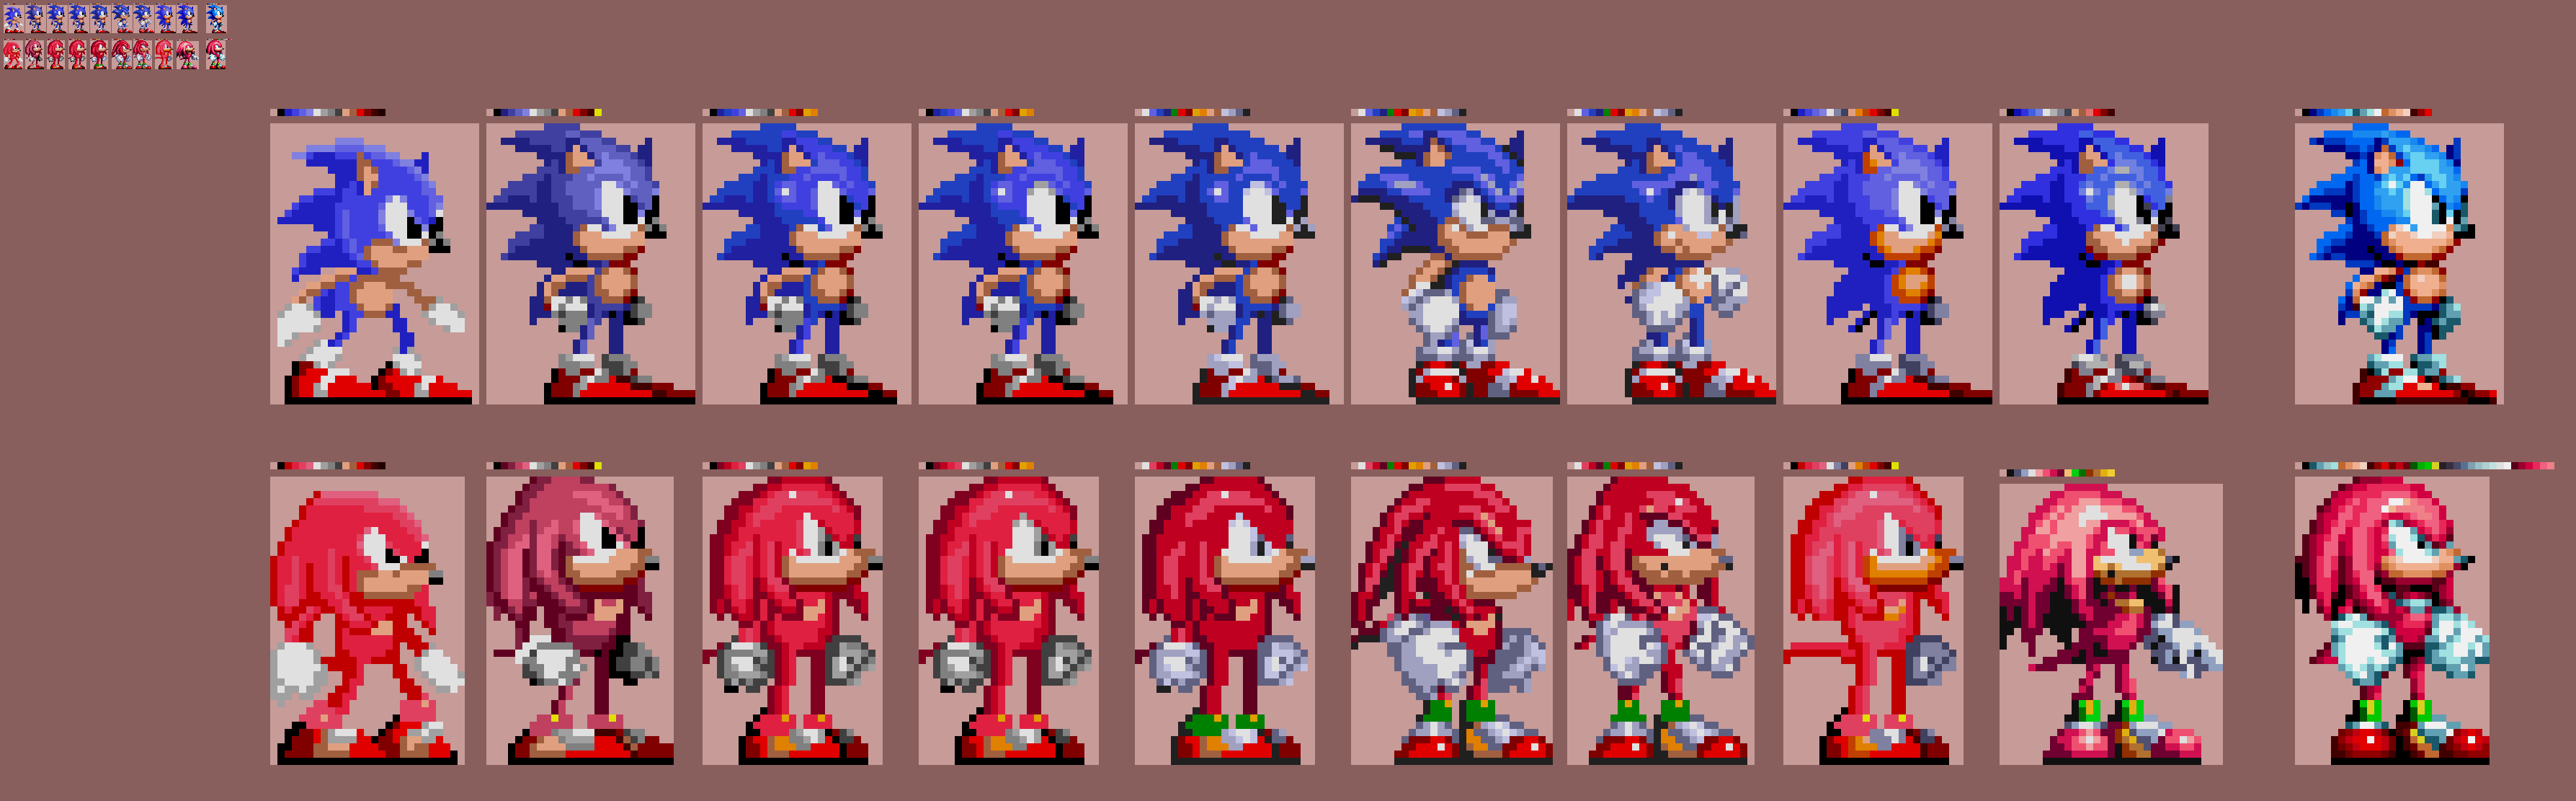 10x S3K Styled Sonic Sprites - Sonic.EXE Head in F by Abbysek on DeviantArt